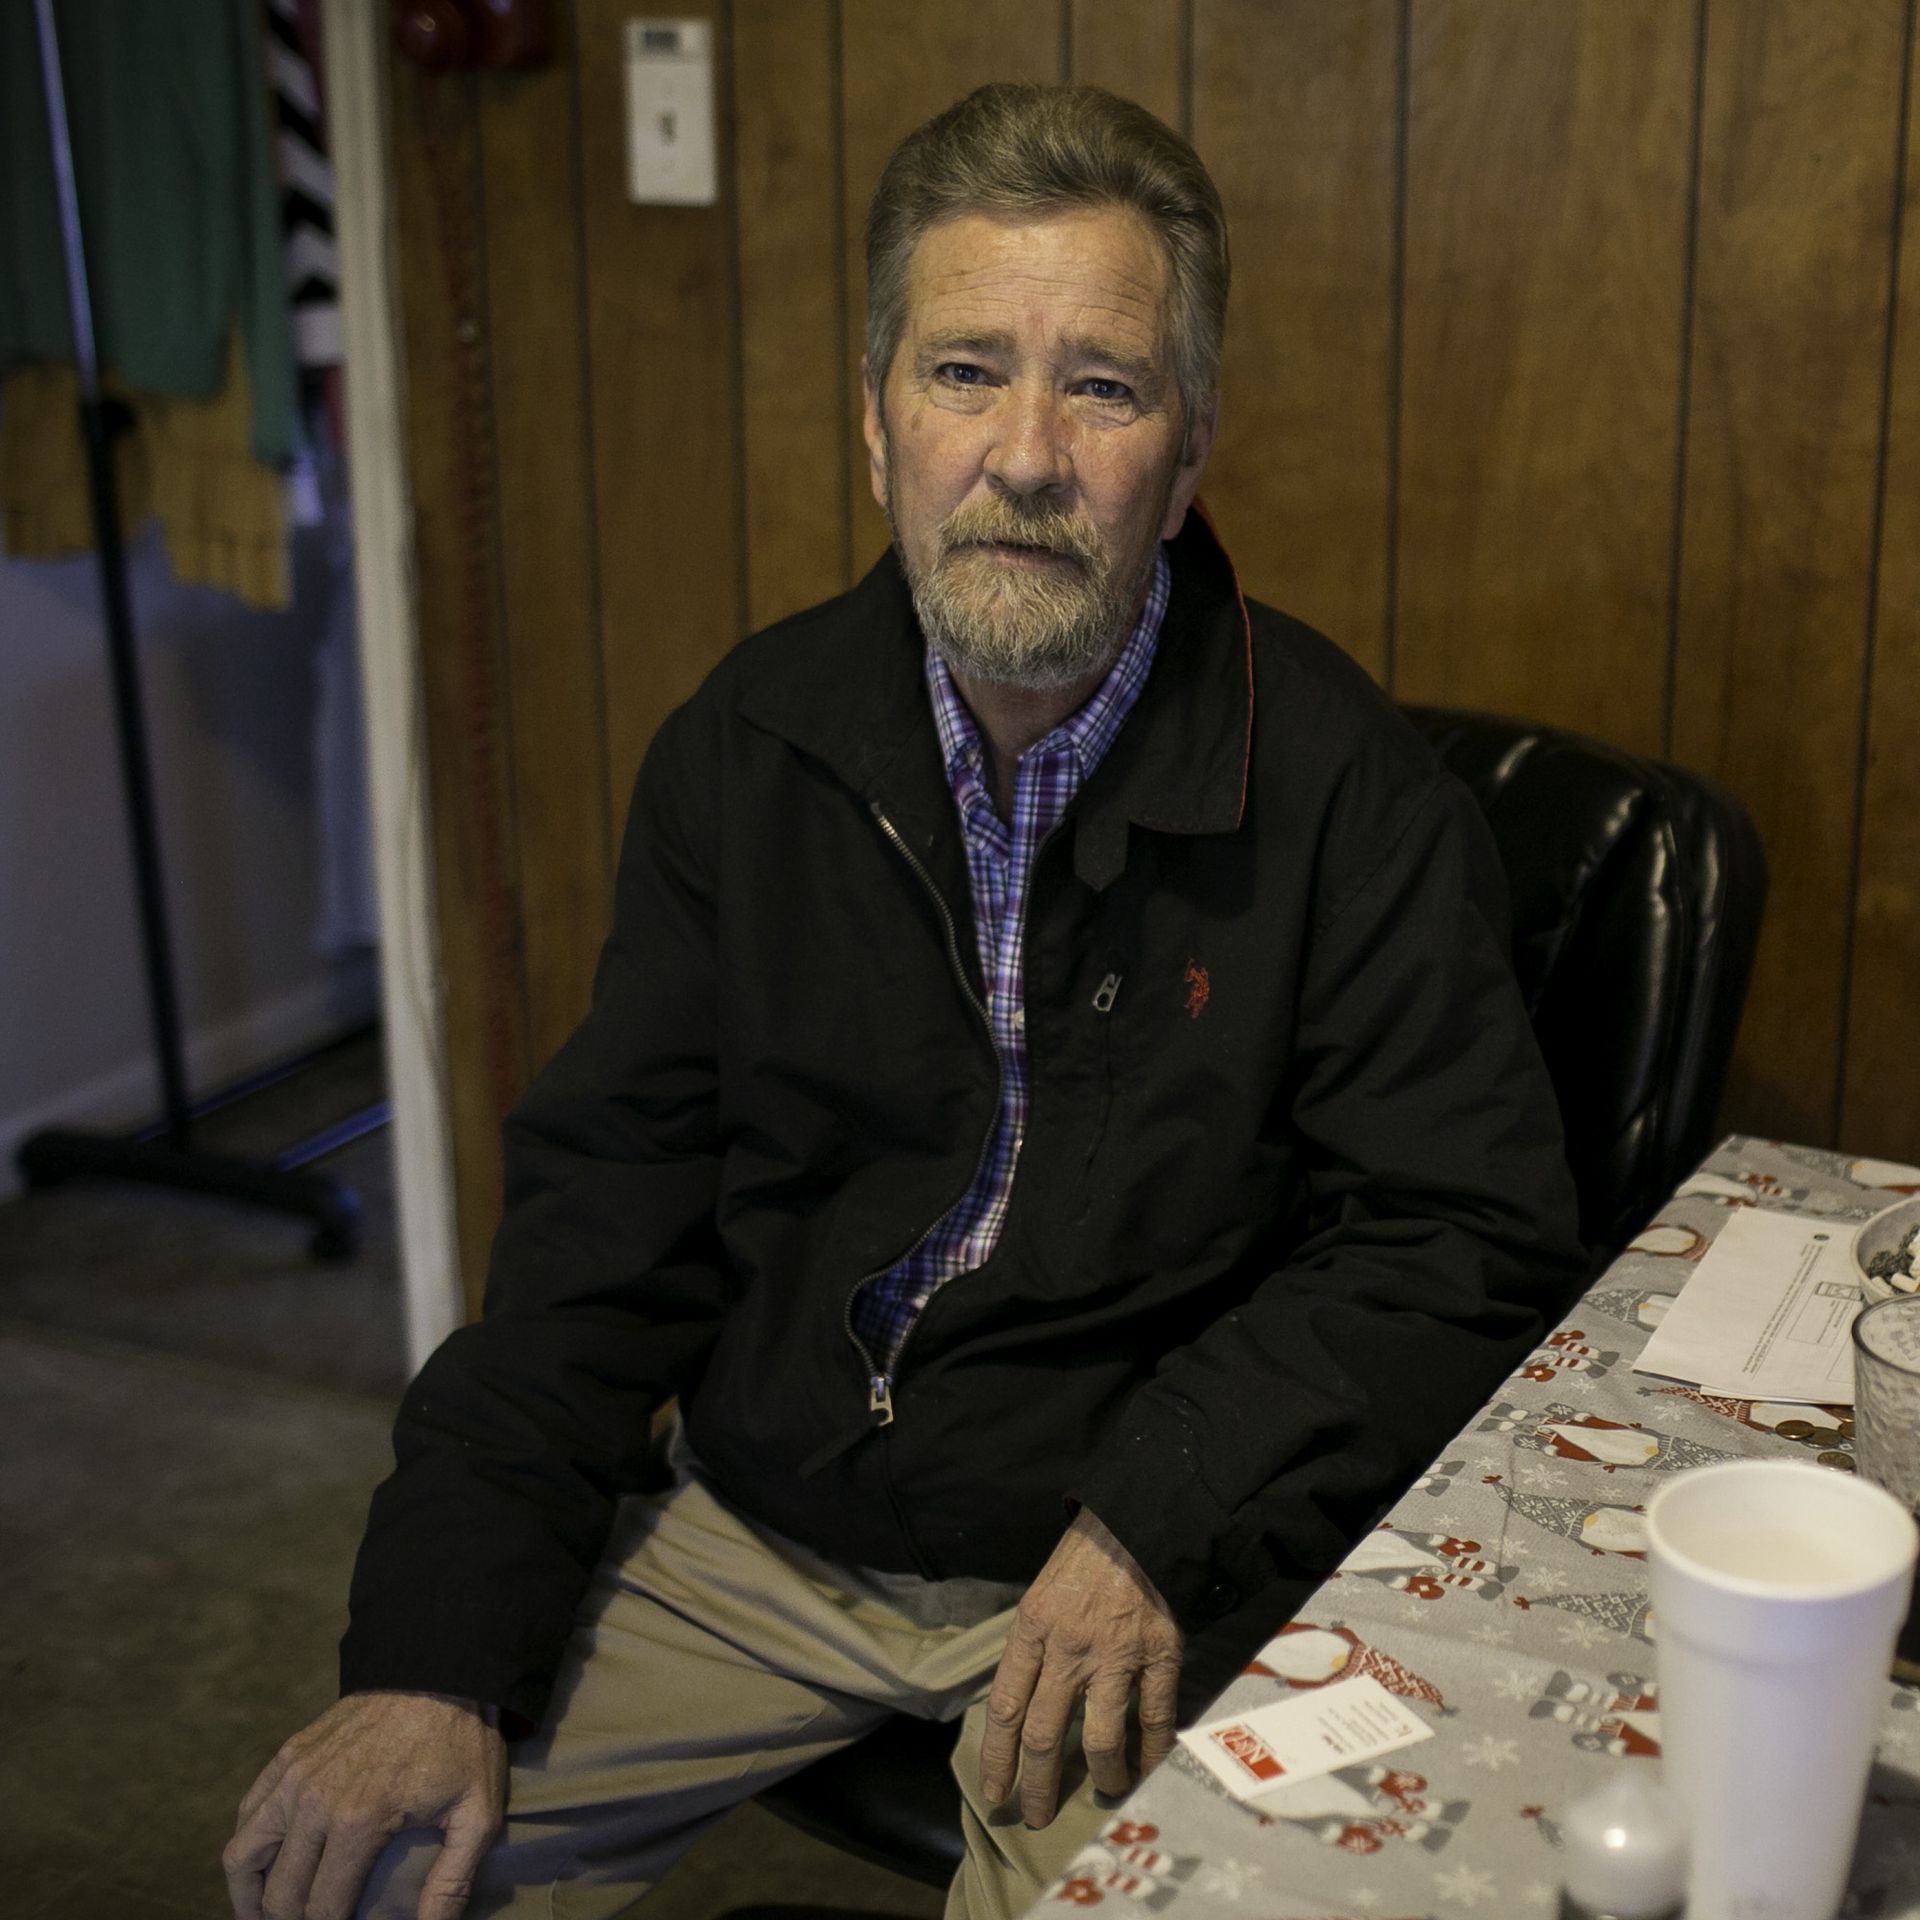 photo of a man named McCrae Dowless sitting at a kitchen table with wood paneling behind him and cigarettes in an ashtray